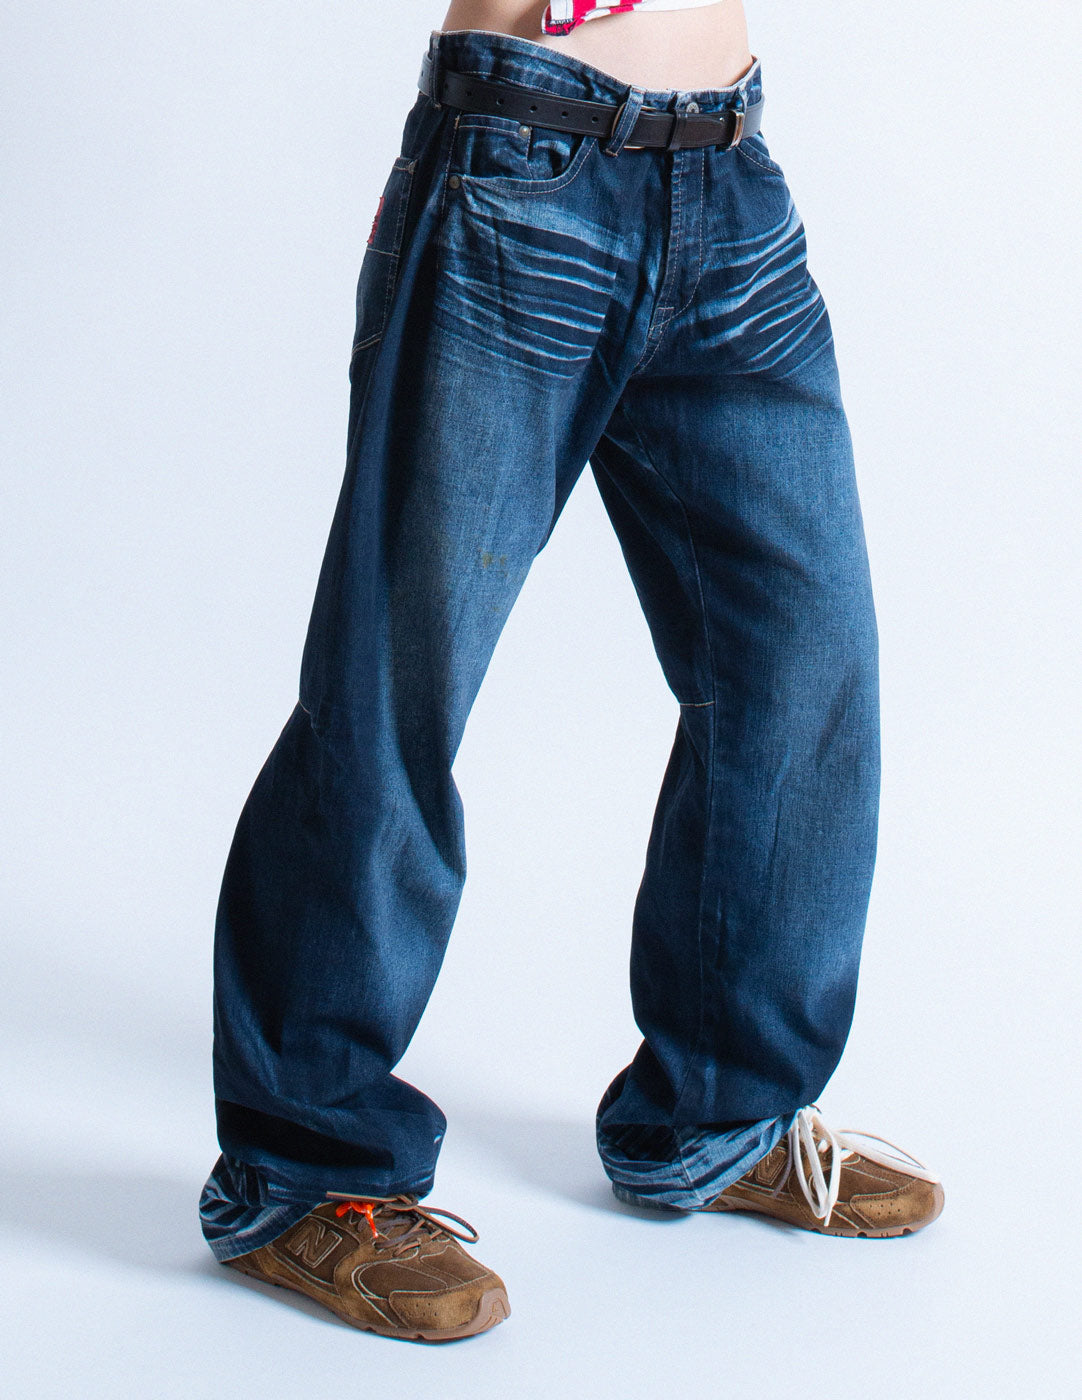 Marithé+François Girbaud vintage straight-legged jeans with back stitching side detail